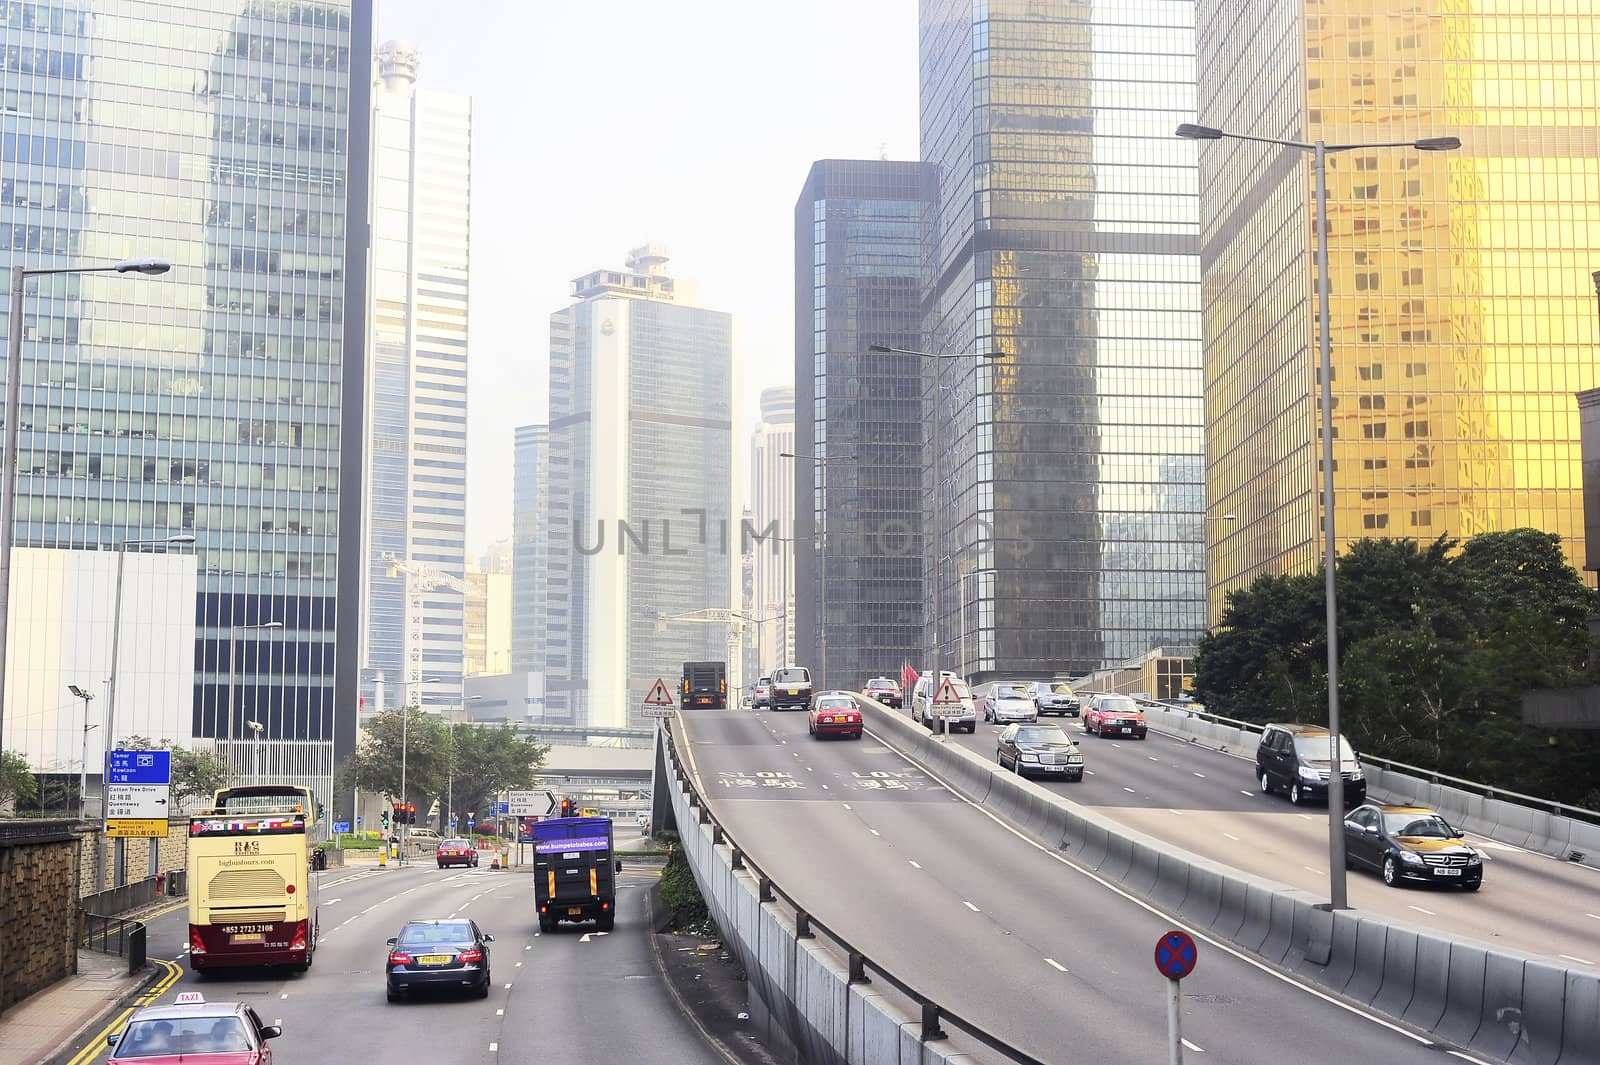 Hong Kong -  January 17, 2013: Many cars on the road at financial center of Hong Kong. Hong Kong is an international financial center, which consists of 112 buildings,standing higher than 180 meters